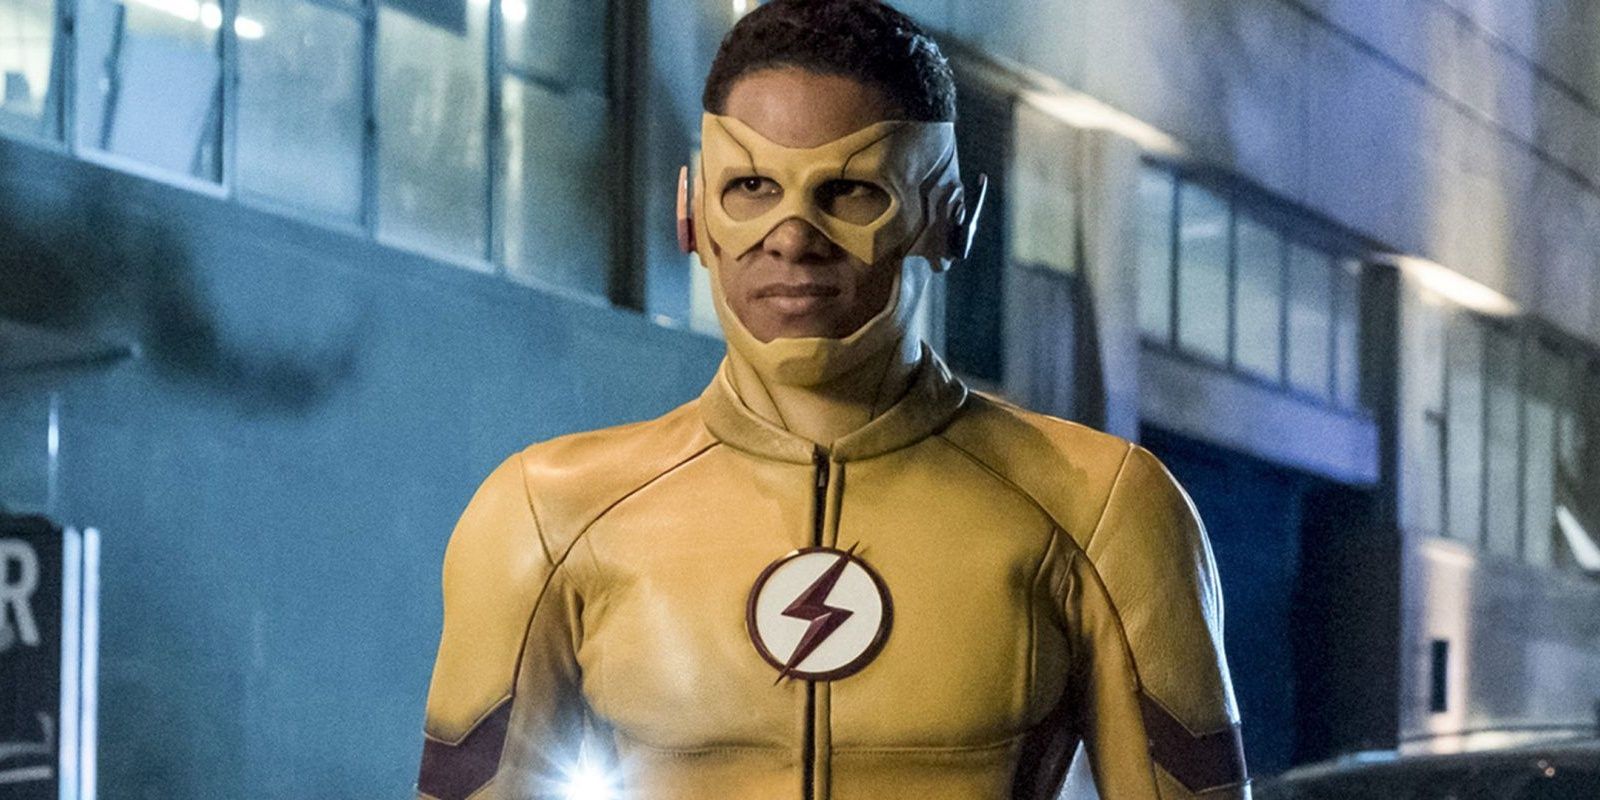 wally west Cropped